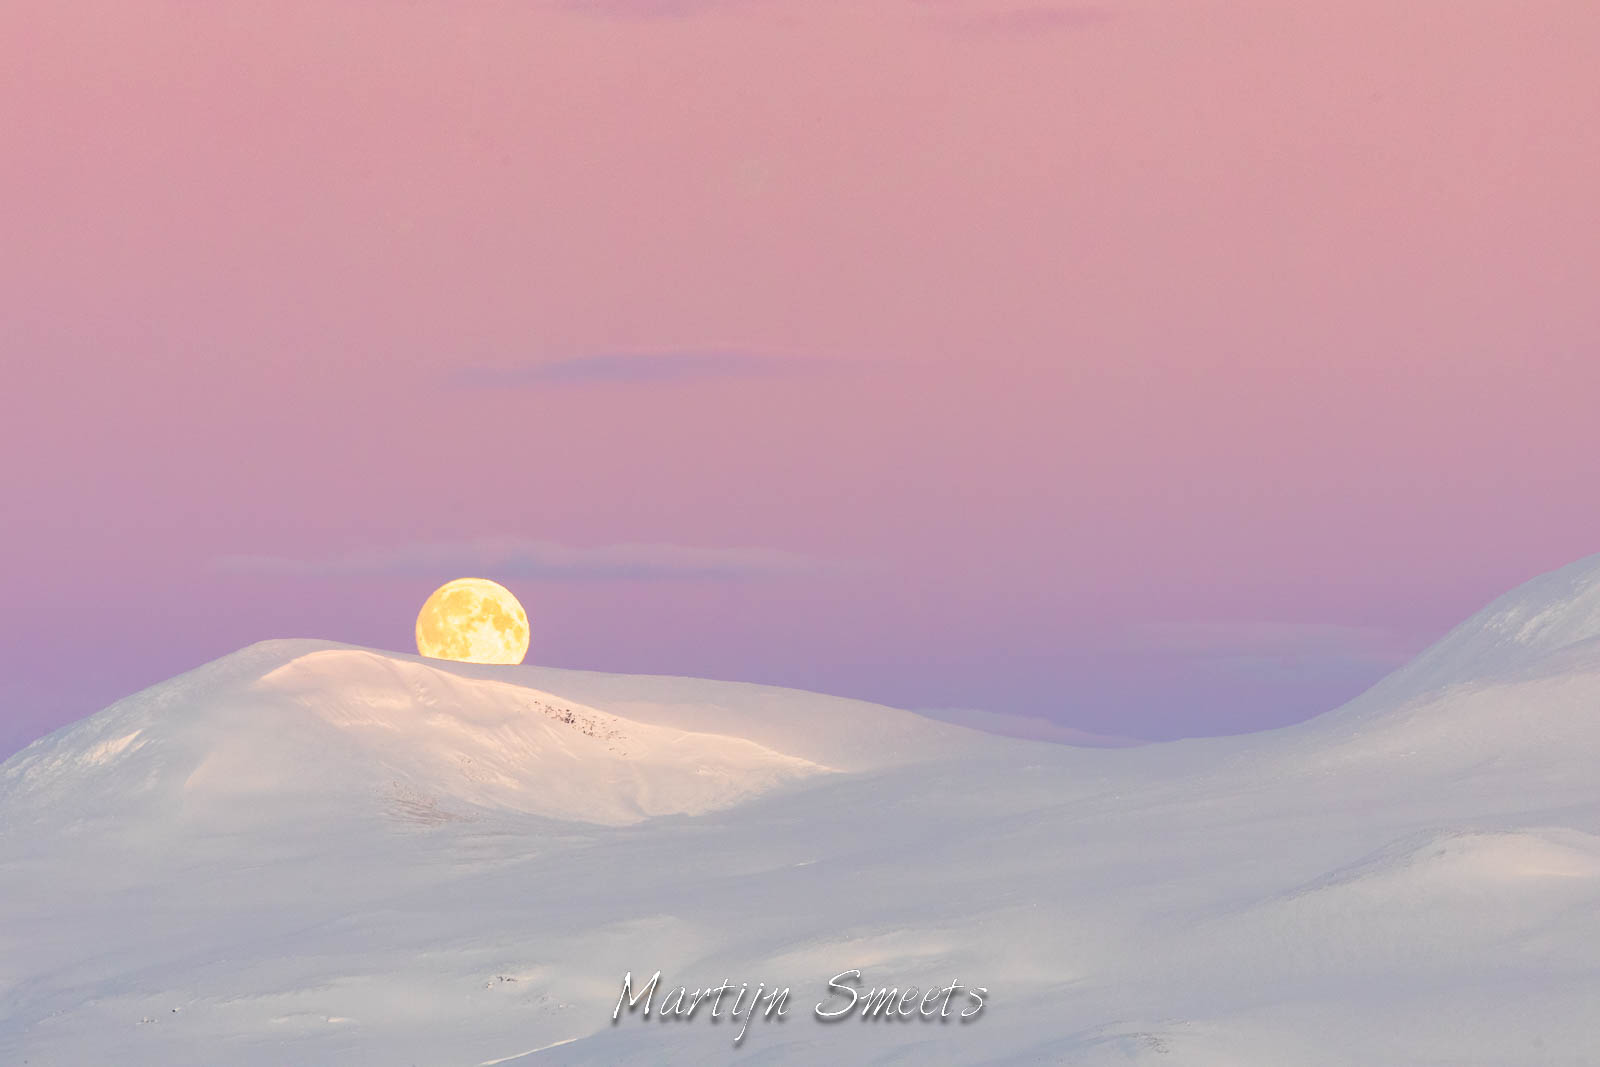 Full moon setting over the snowy mountains of Dividal in Norway.